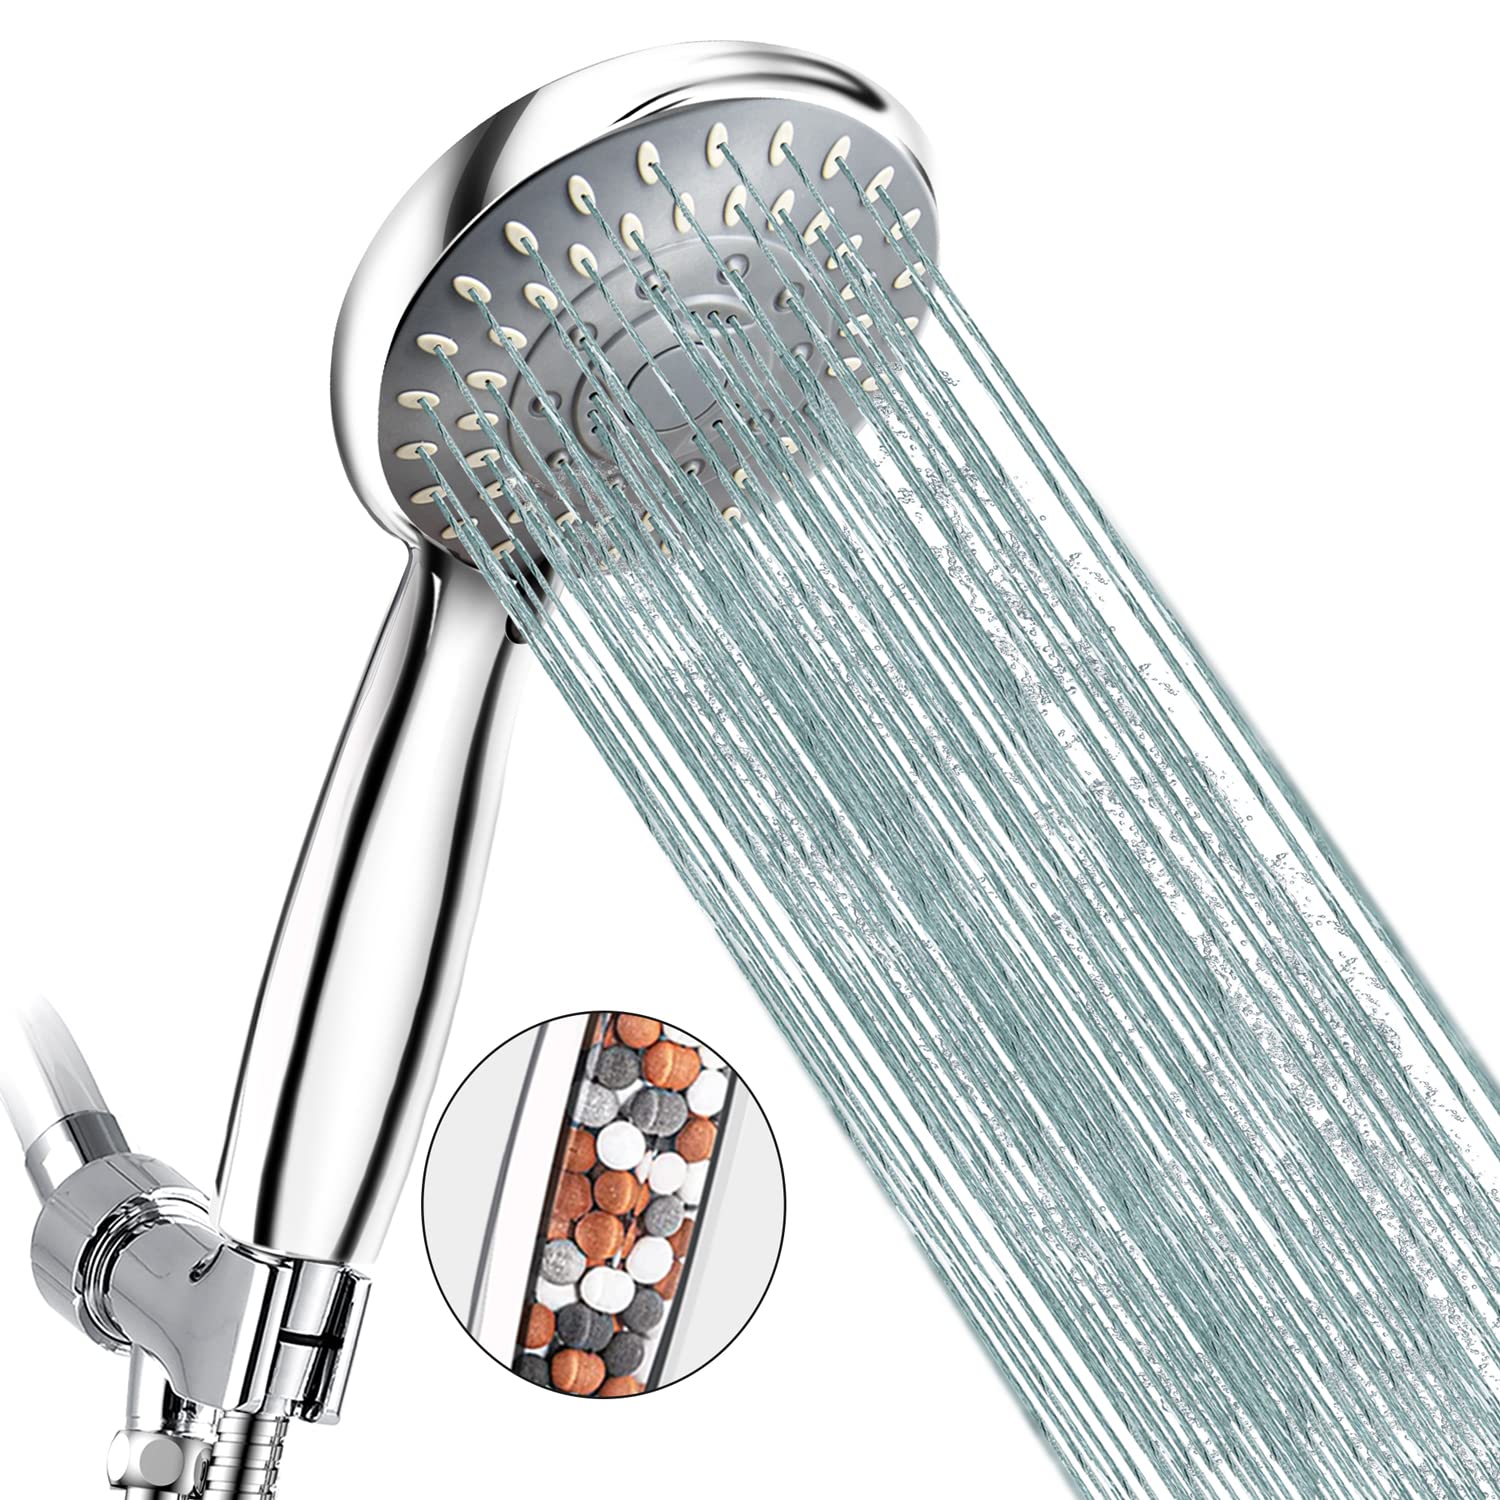 Filtered Shower Head High Pressure: INAVAMZ 5 Settings Shower Head with Filter For Hard Water Come with Bracket 59